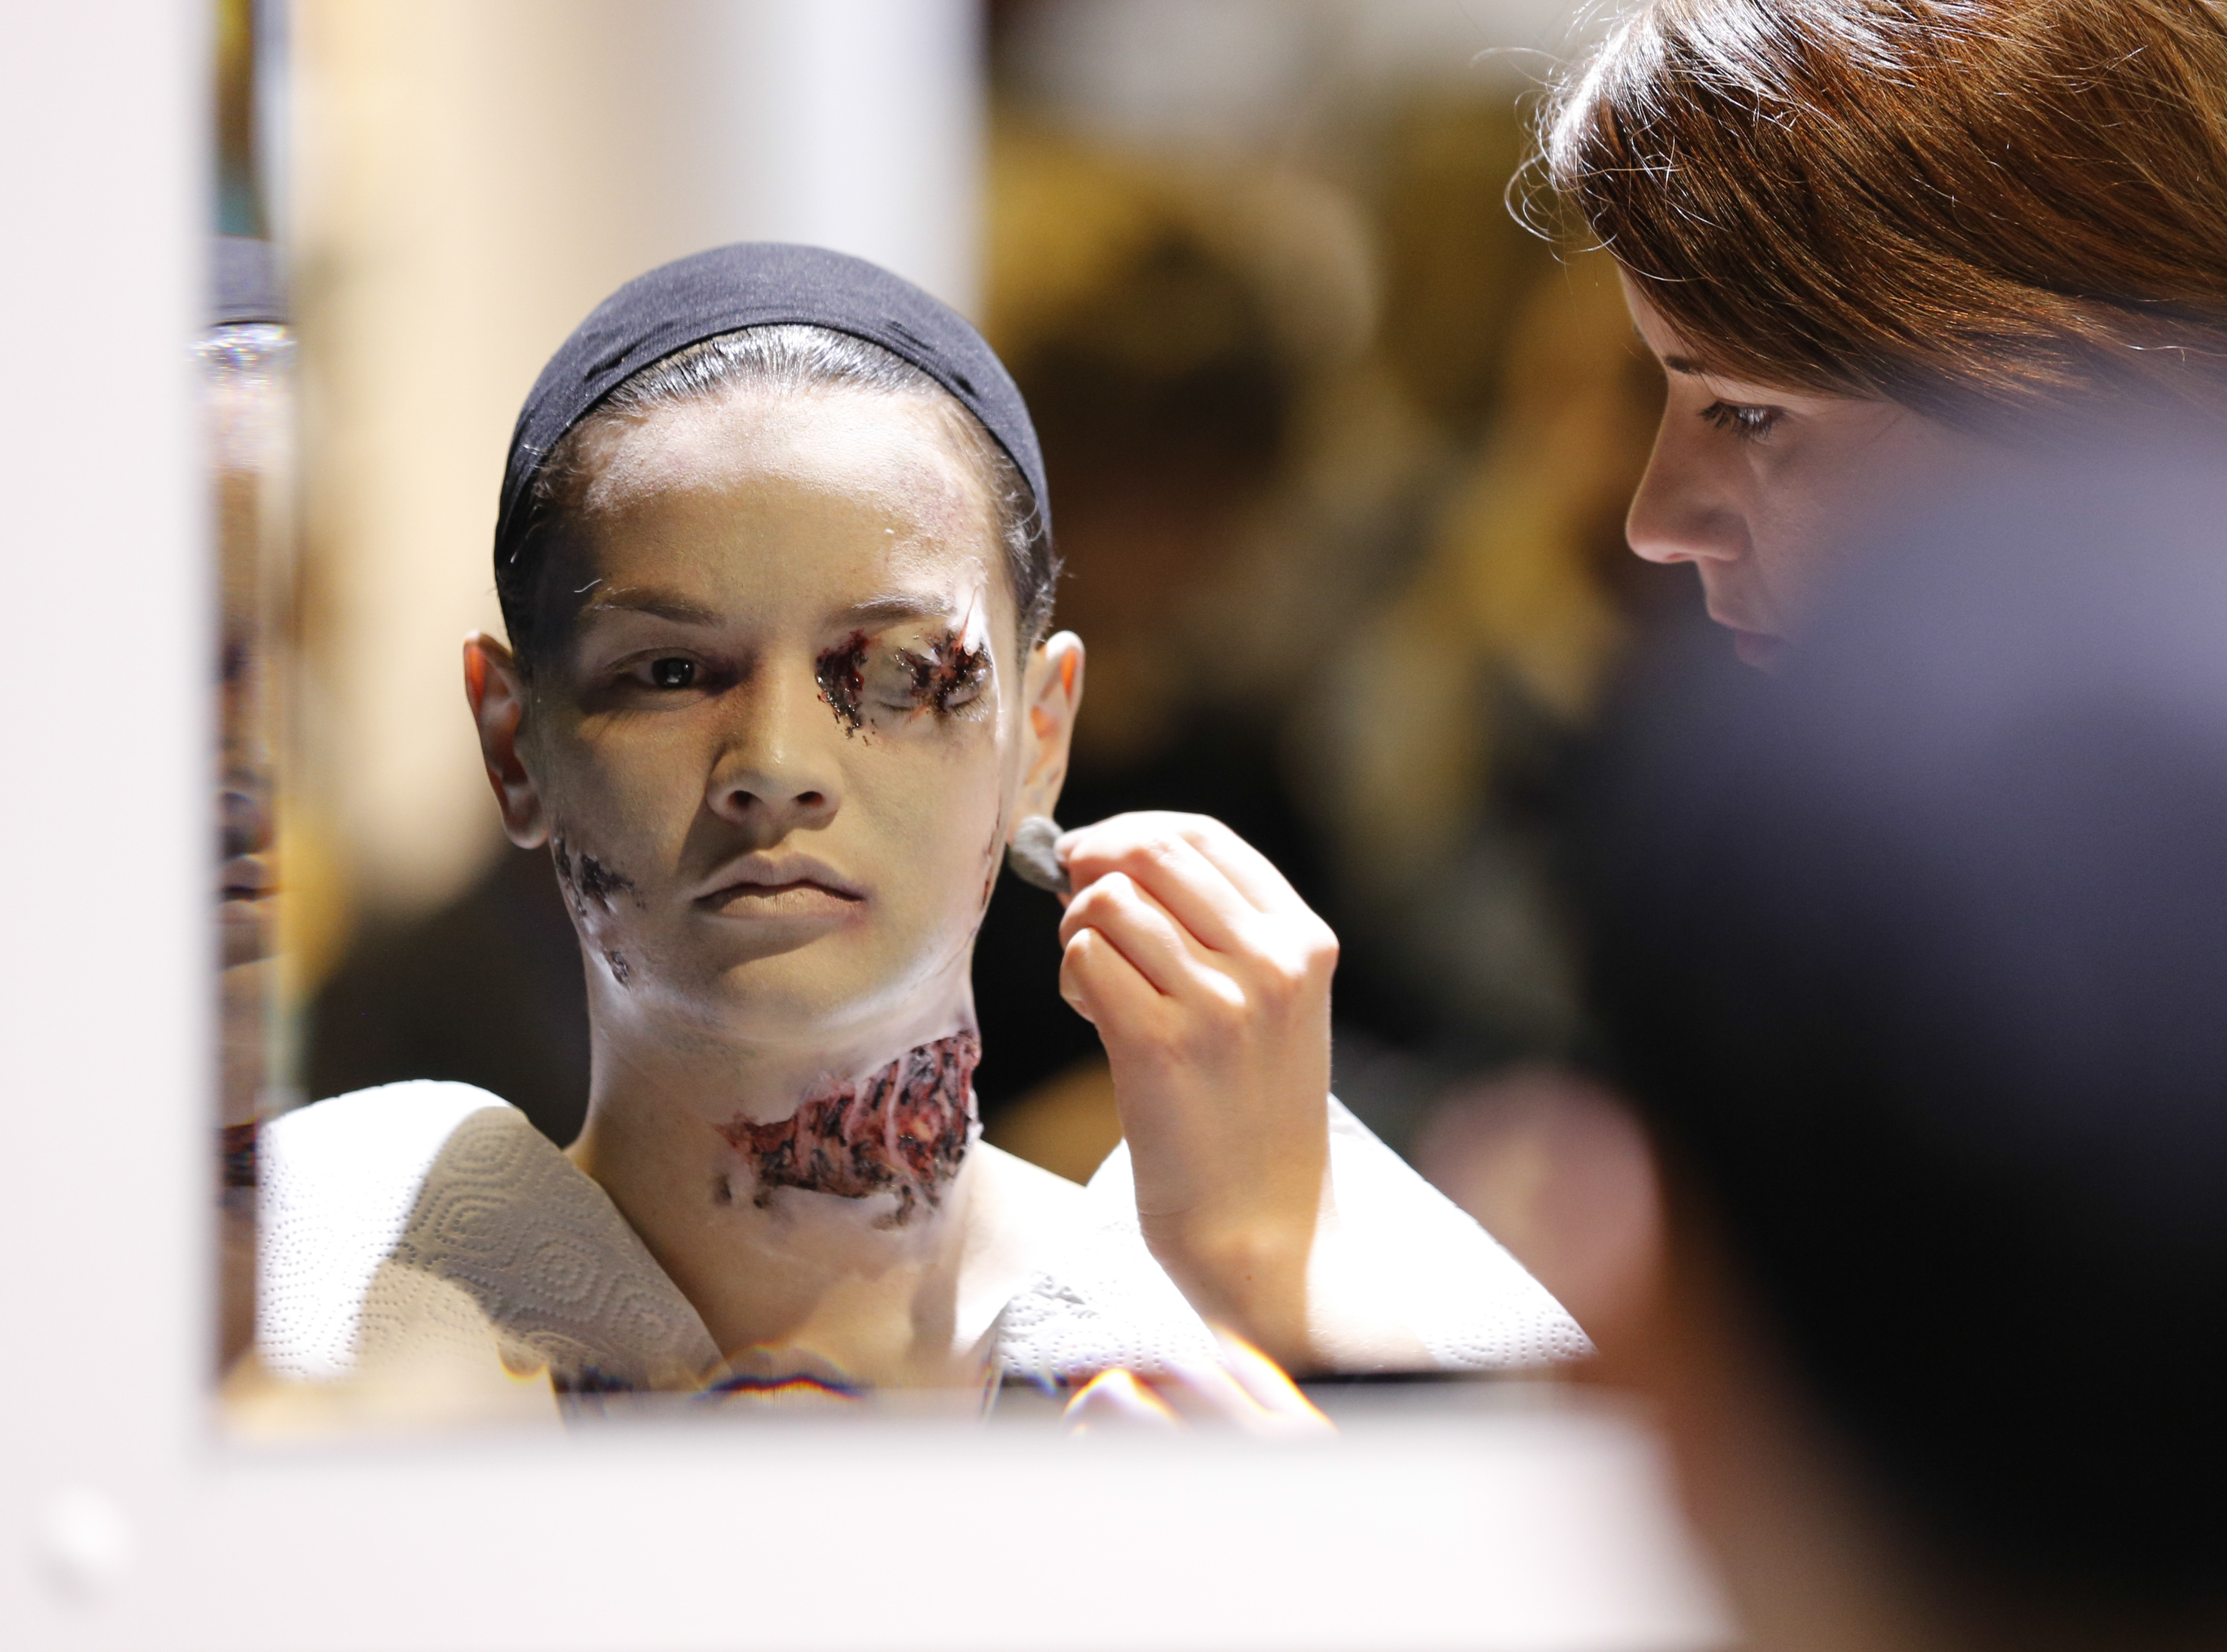 Make-up Artist Aisha King applying make-up and prosthetics for a floater SFX make-up during the Championship for Make-up Artists in Training.